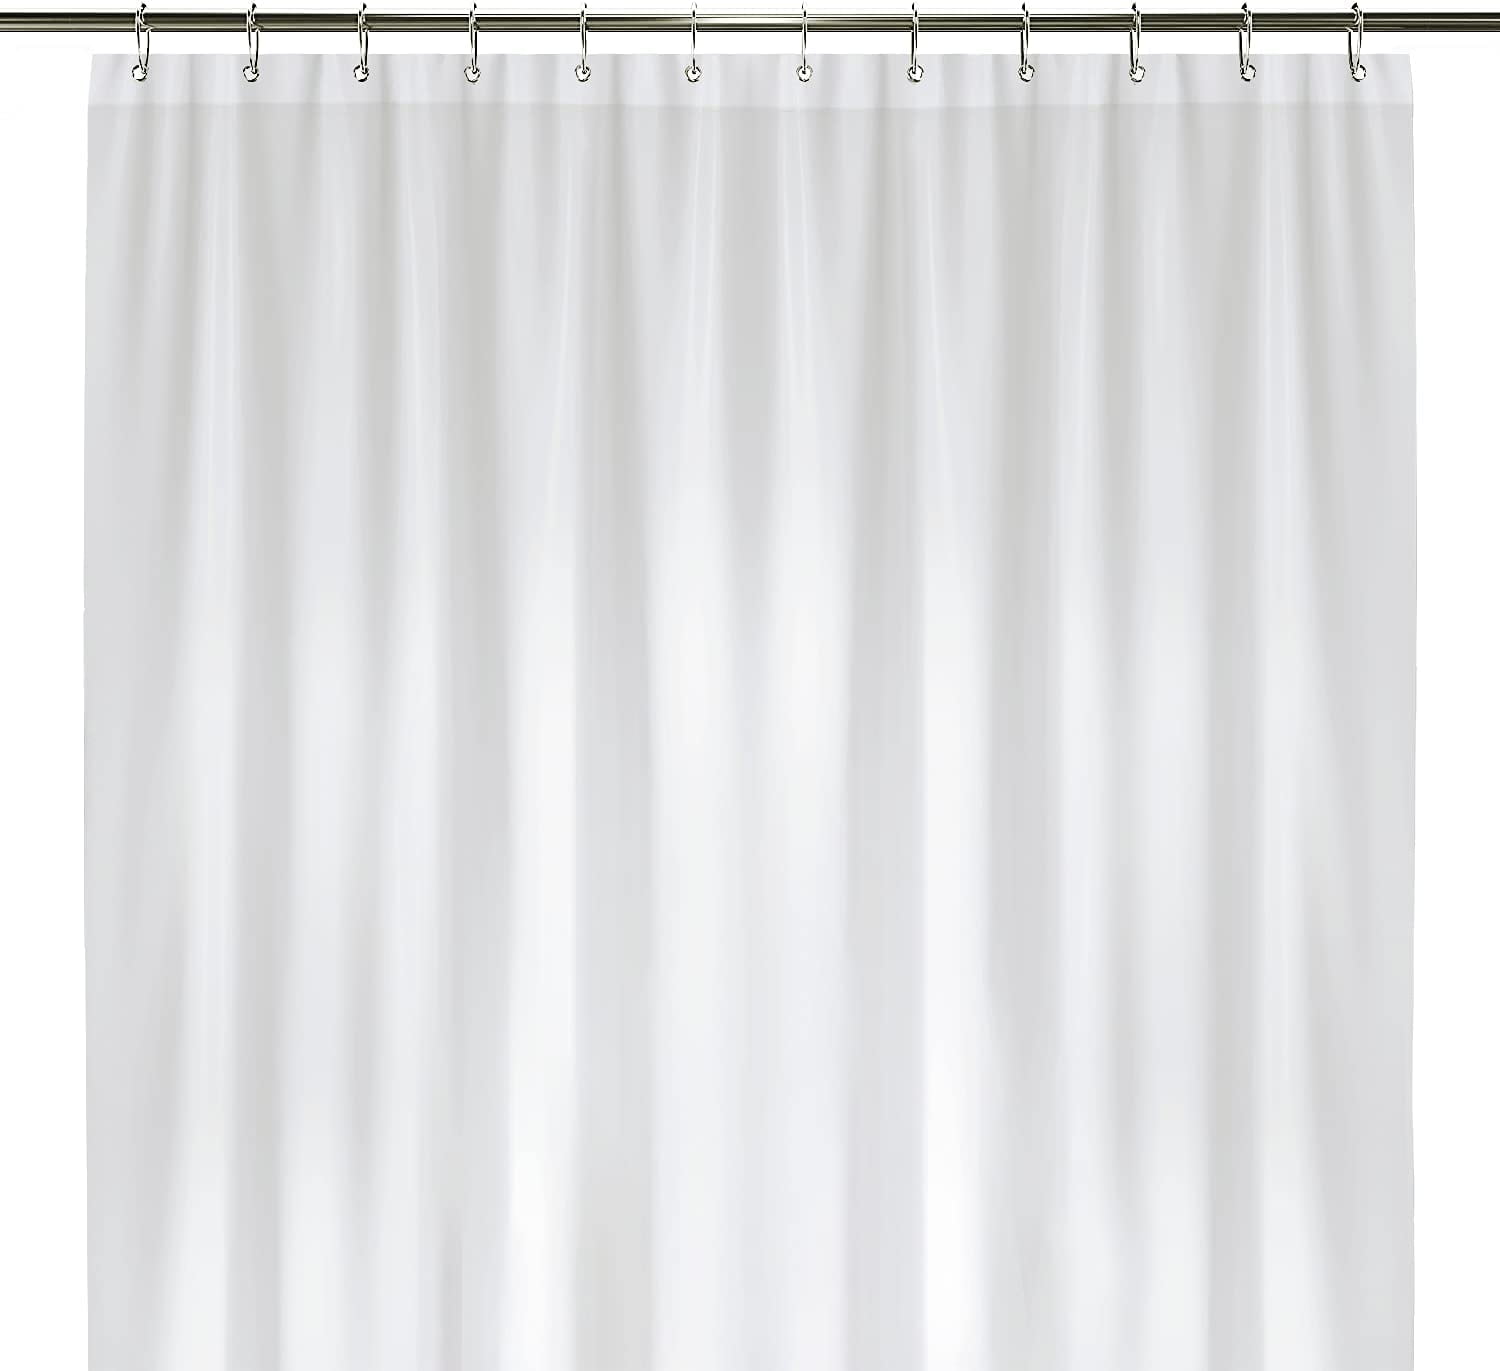 Details about   LiBa Mildew Resistant Fabric Shower Curtain Waterproof and Water White 72x72 